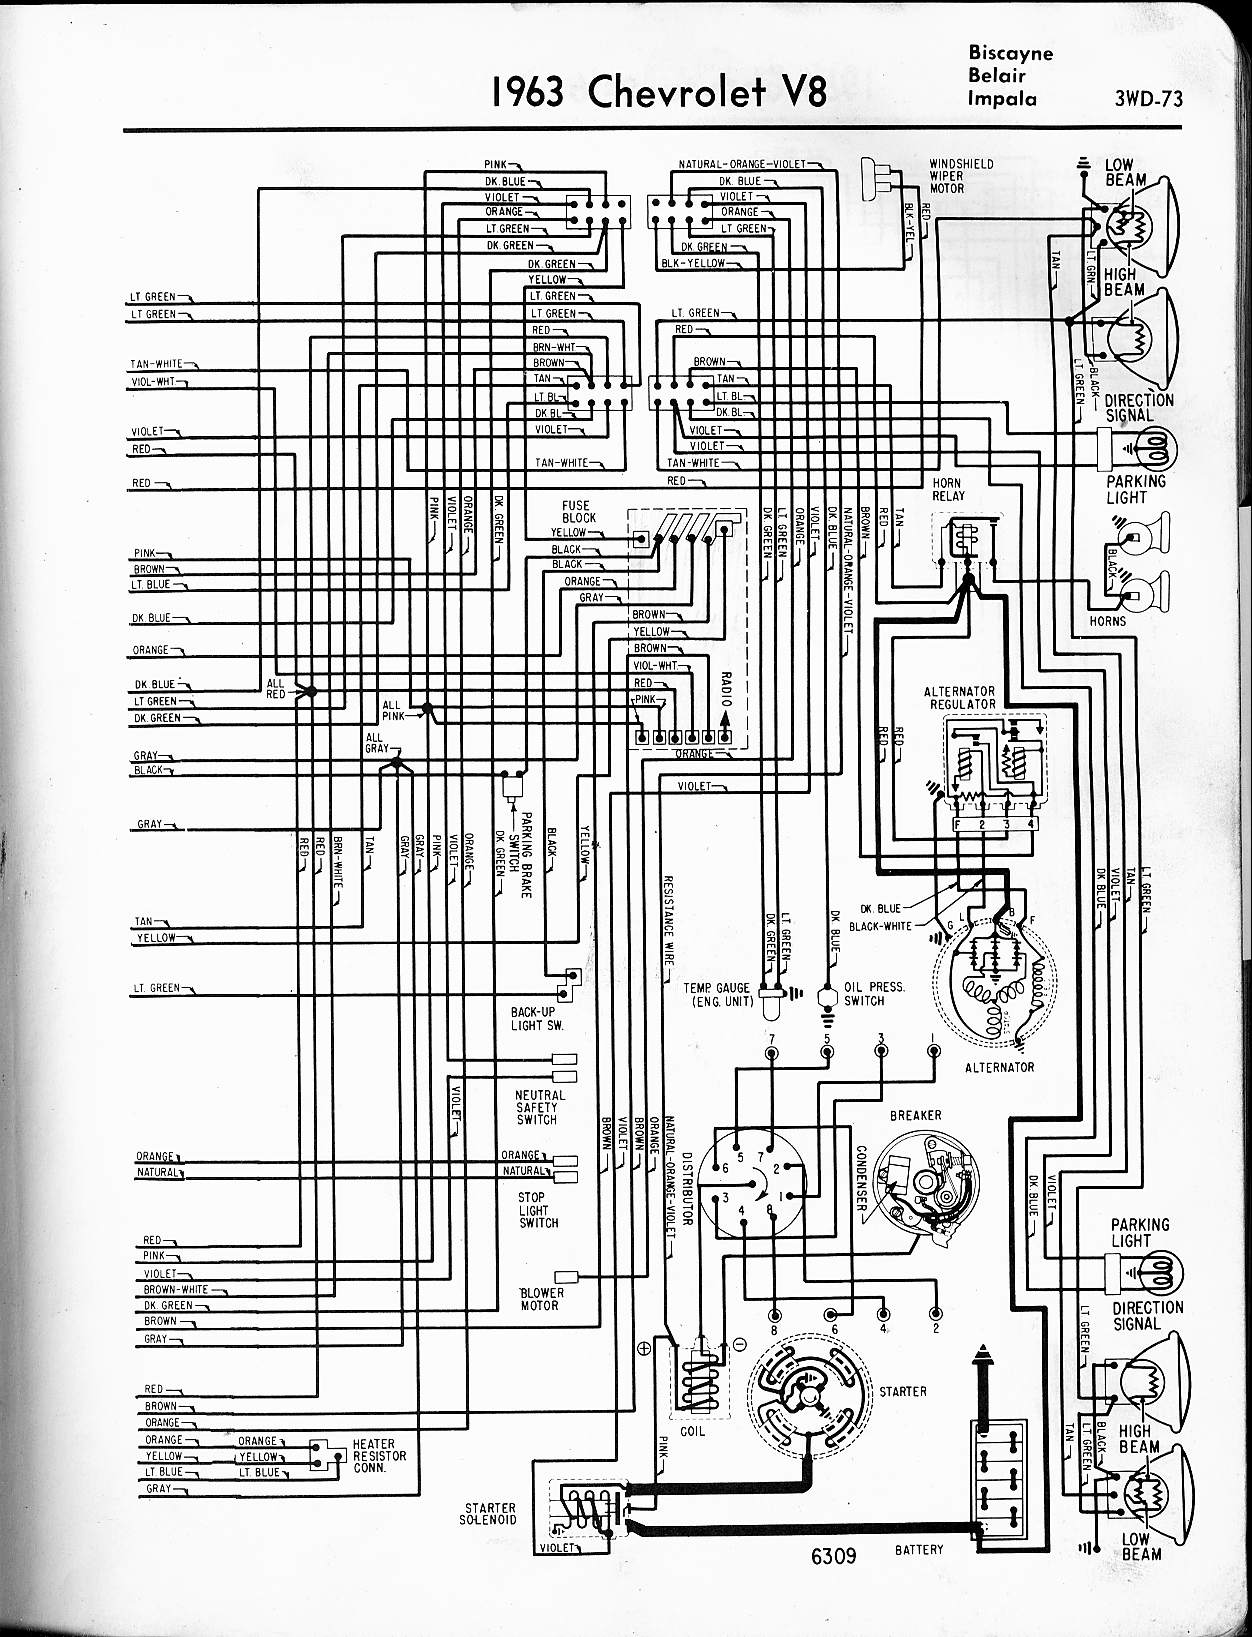 1966 Chevy Bel Air Ignition Switch Wiring Diagram from www.oldcarmanualproject.com